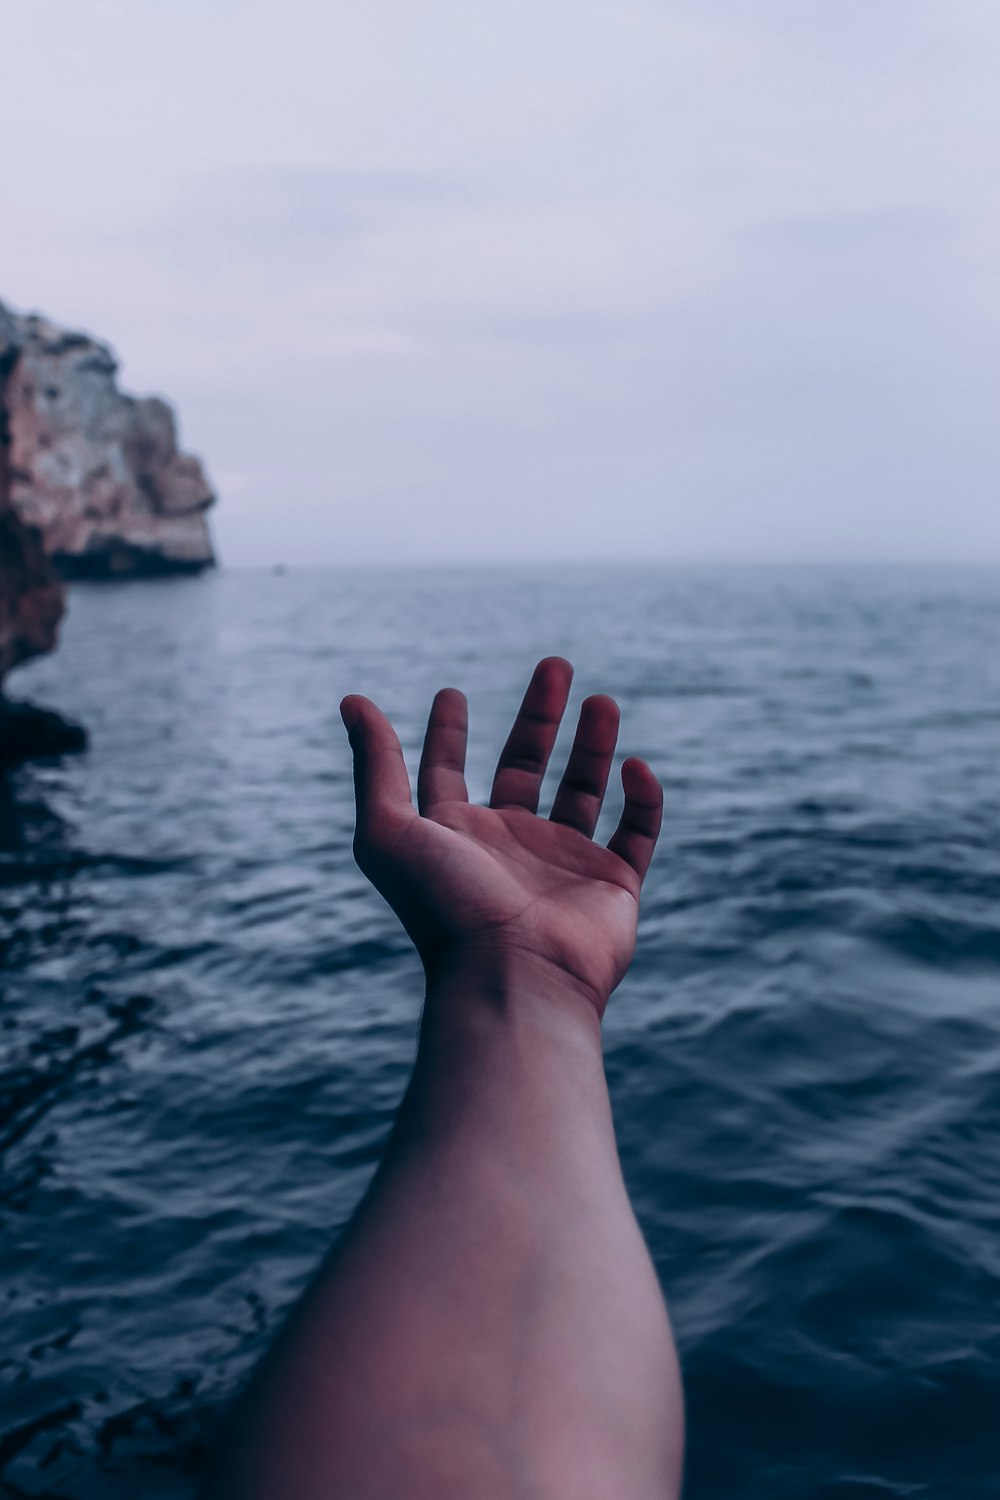 a person's hand reaching out to the ocean